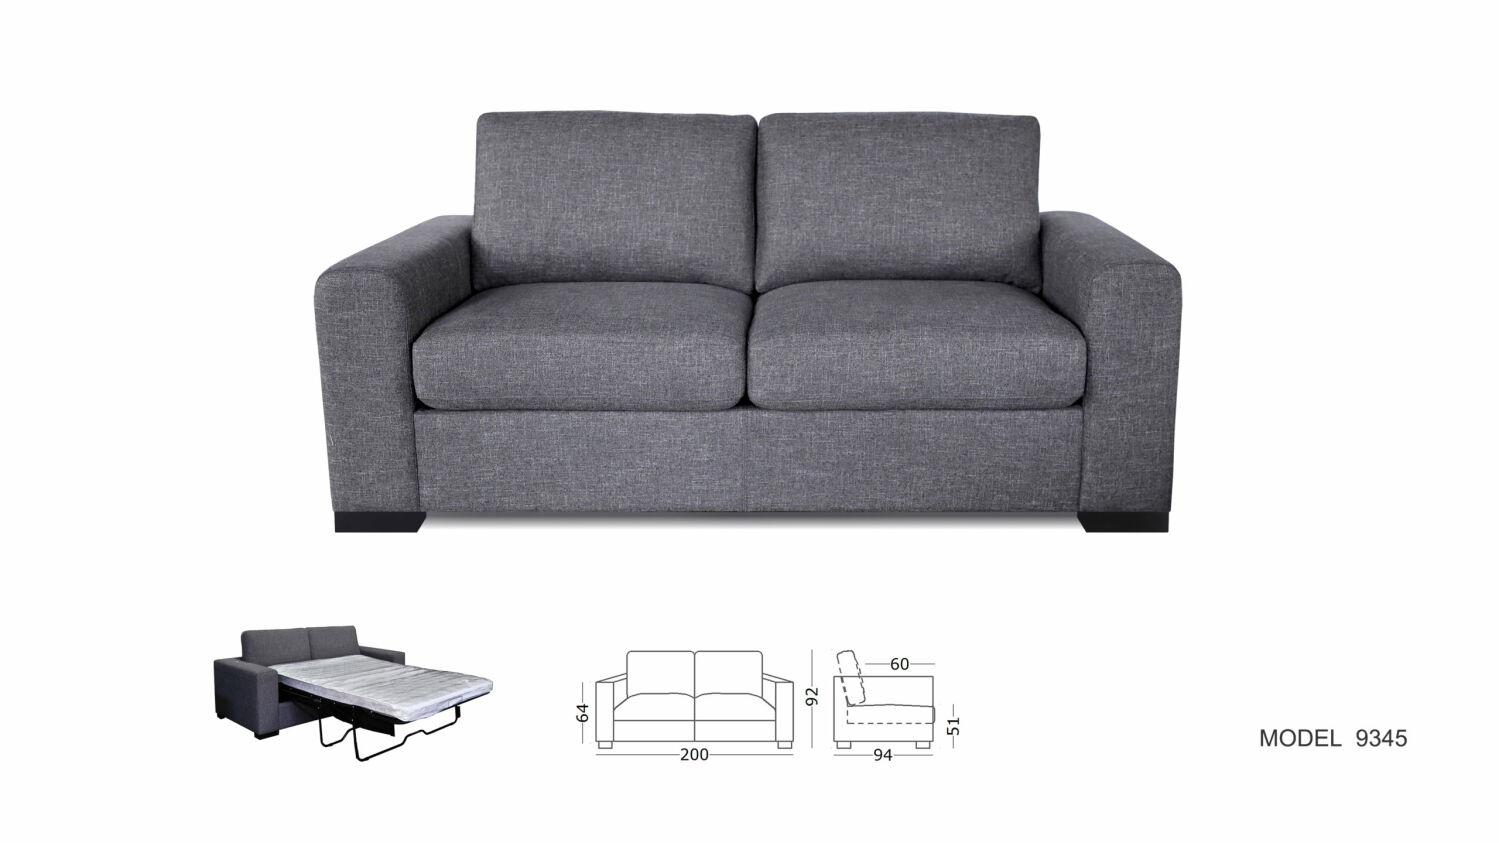 Globe 2.5 Seater Sofabed